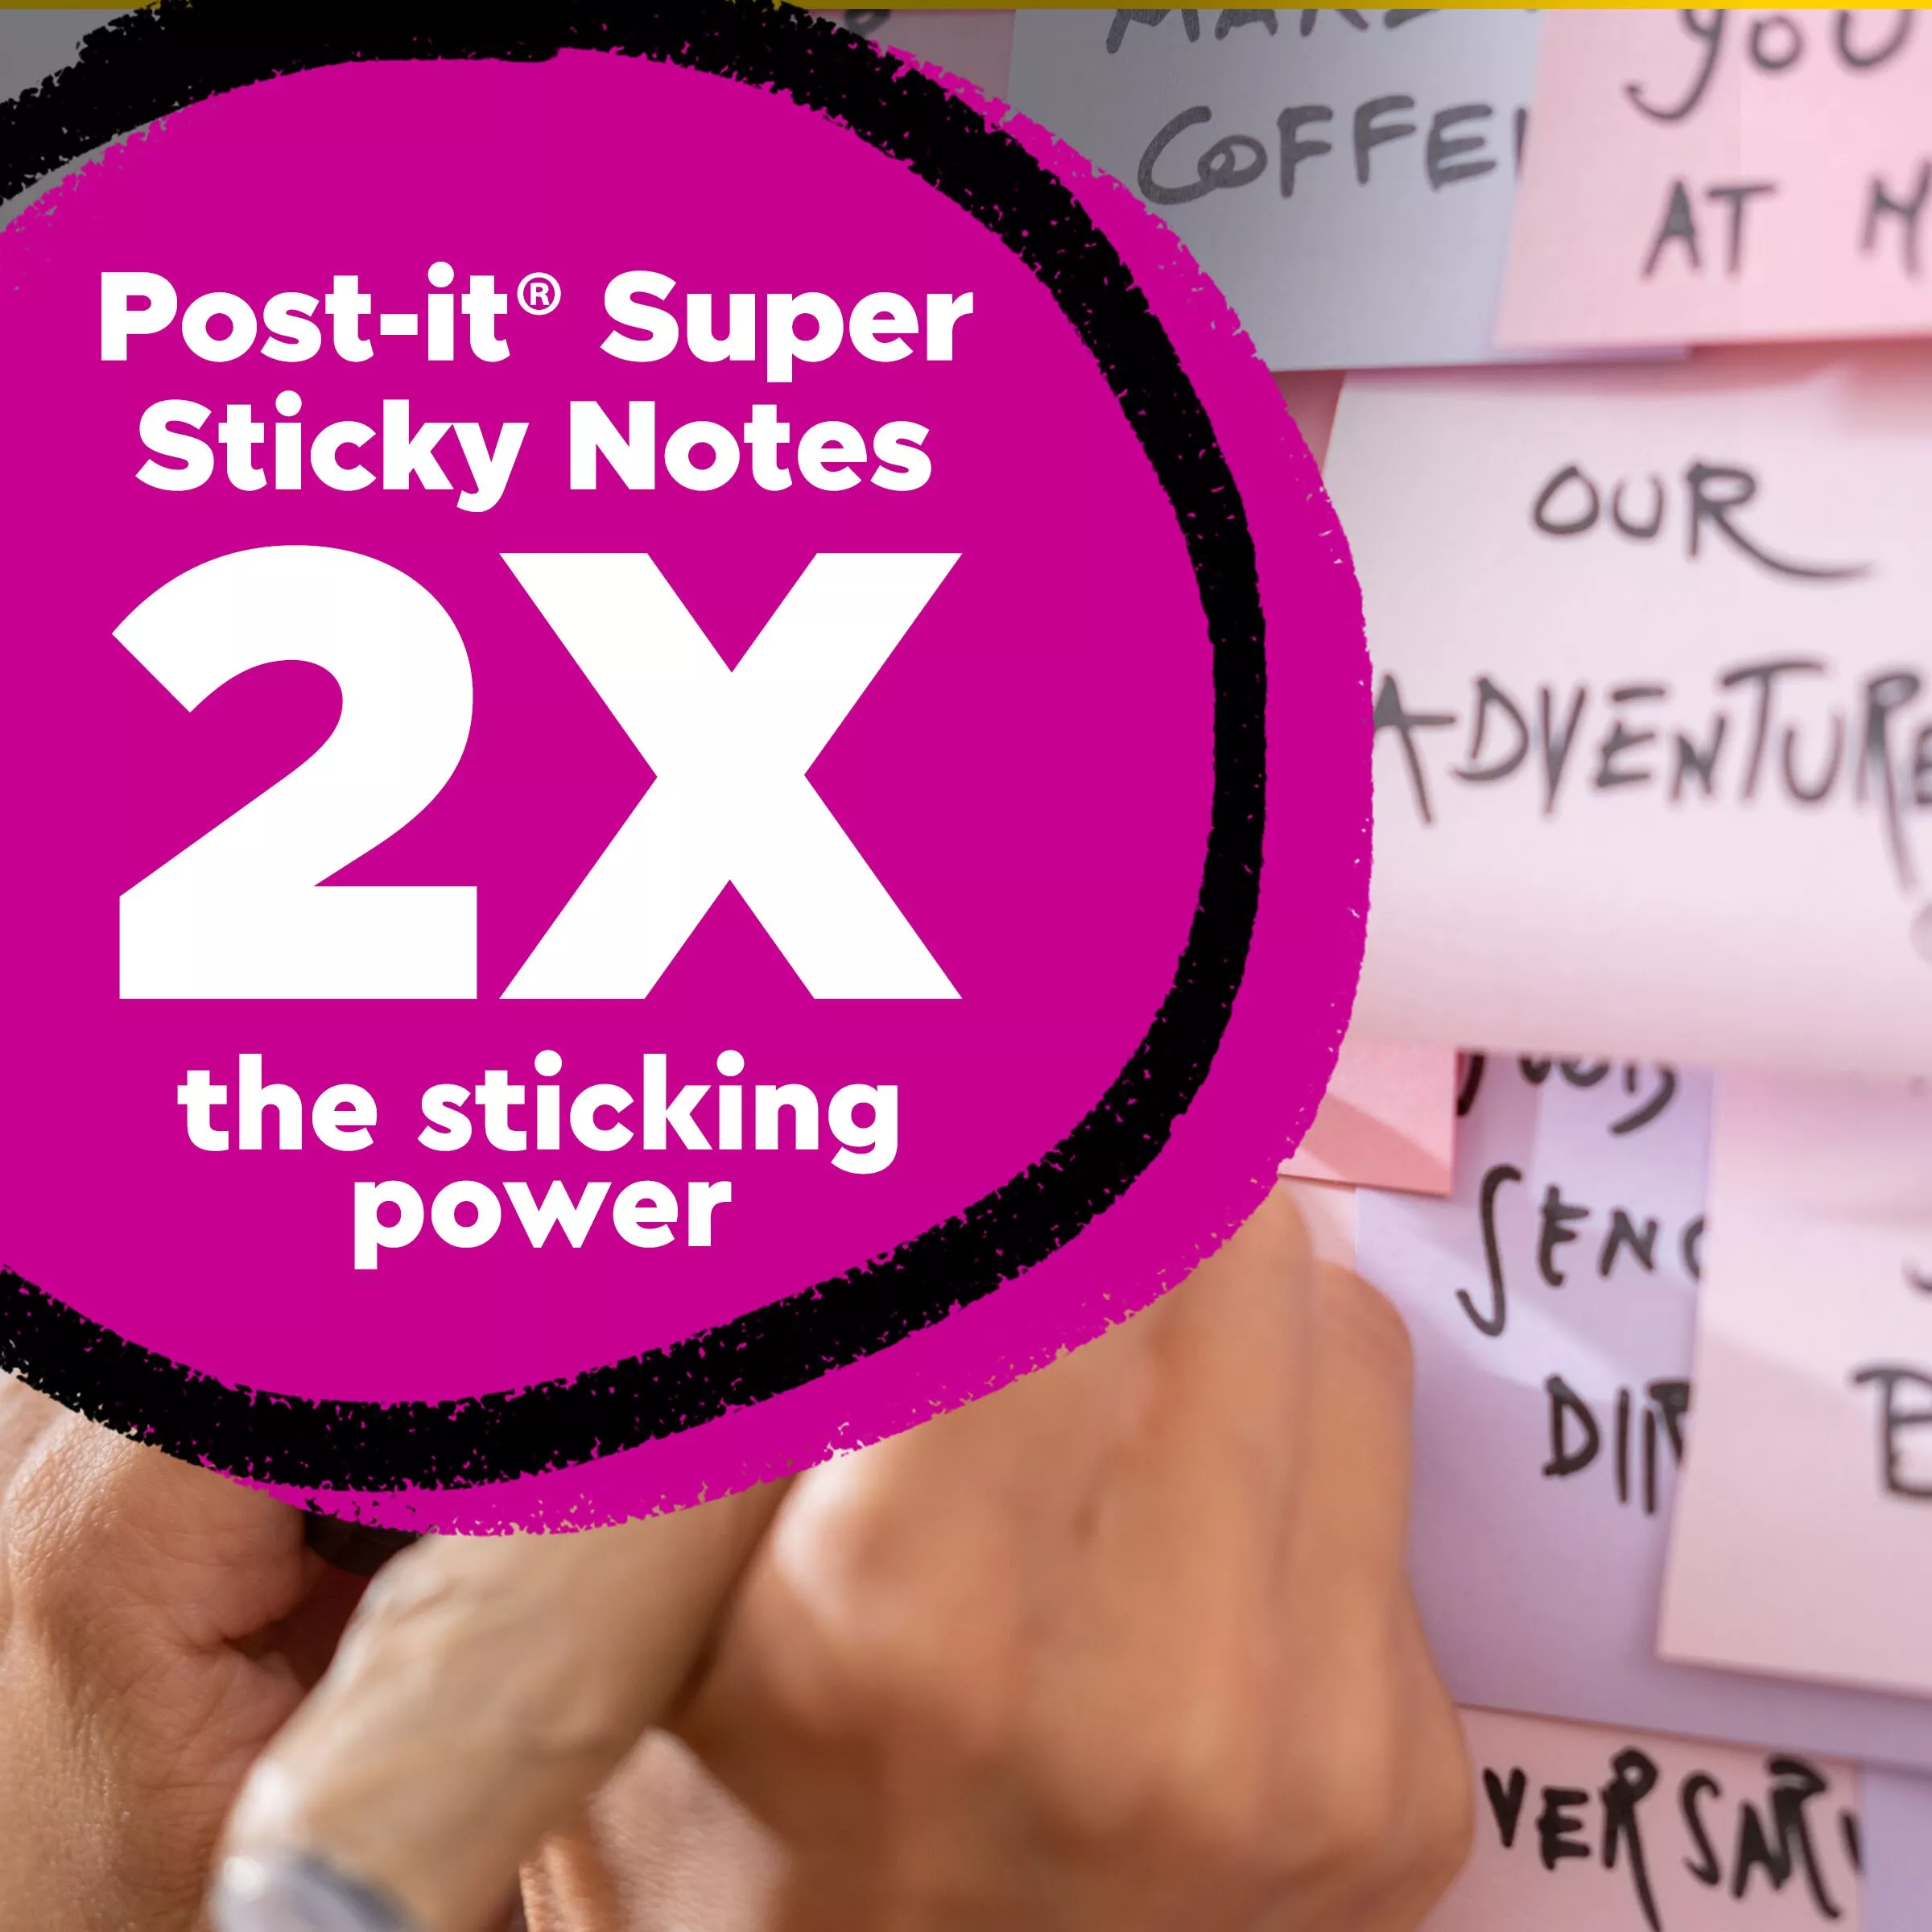 SKU 7100290397 | Post-it® Super Sticky Recycled Notes 654R-12SSNRP